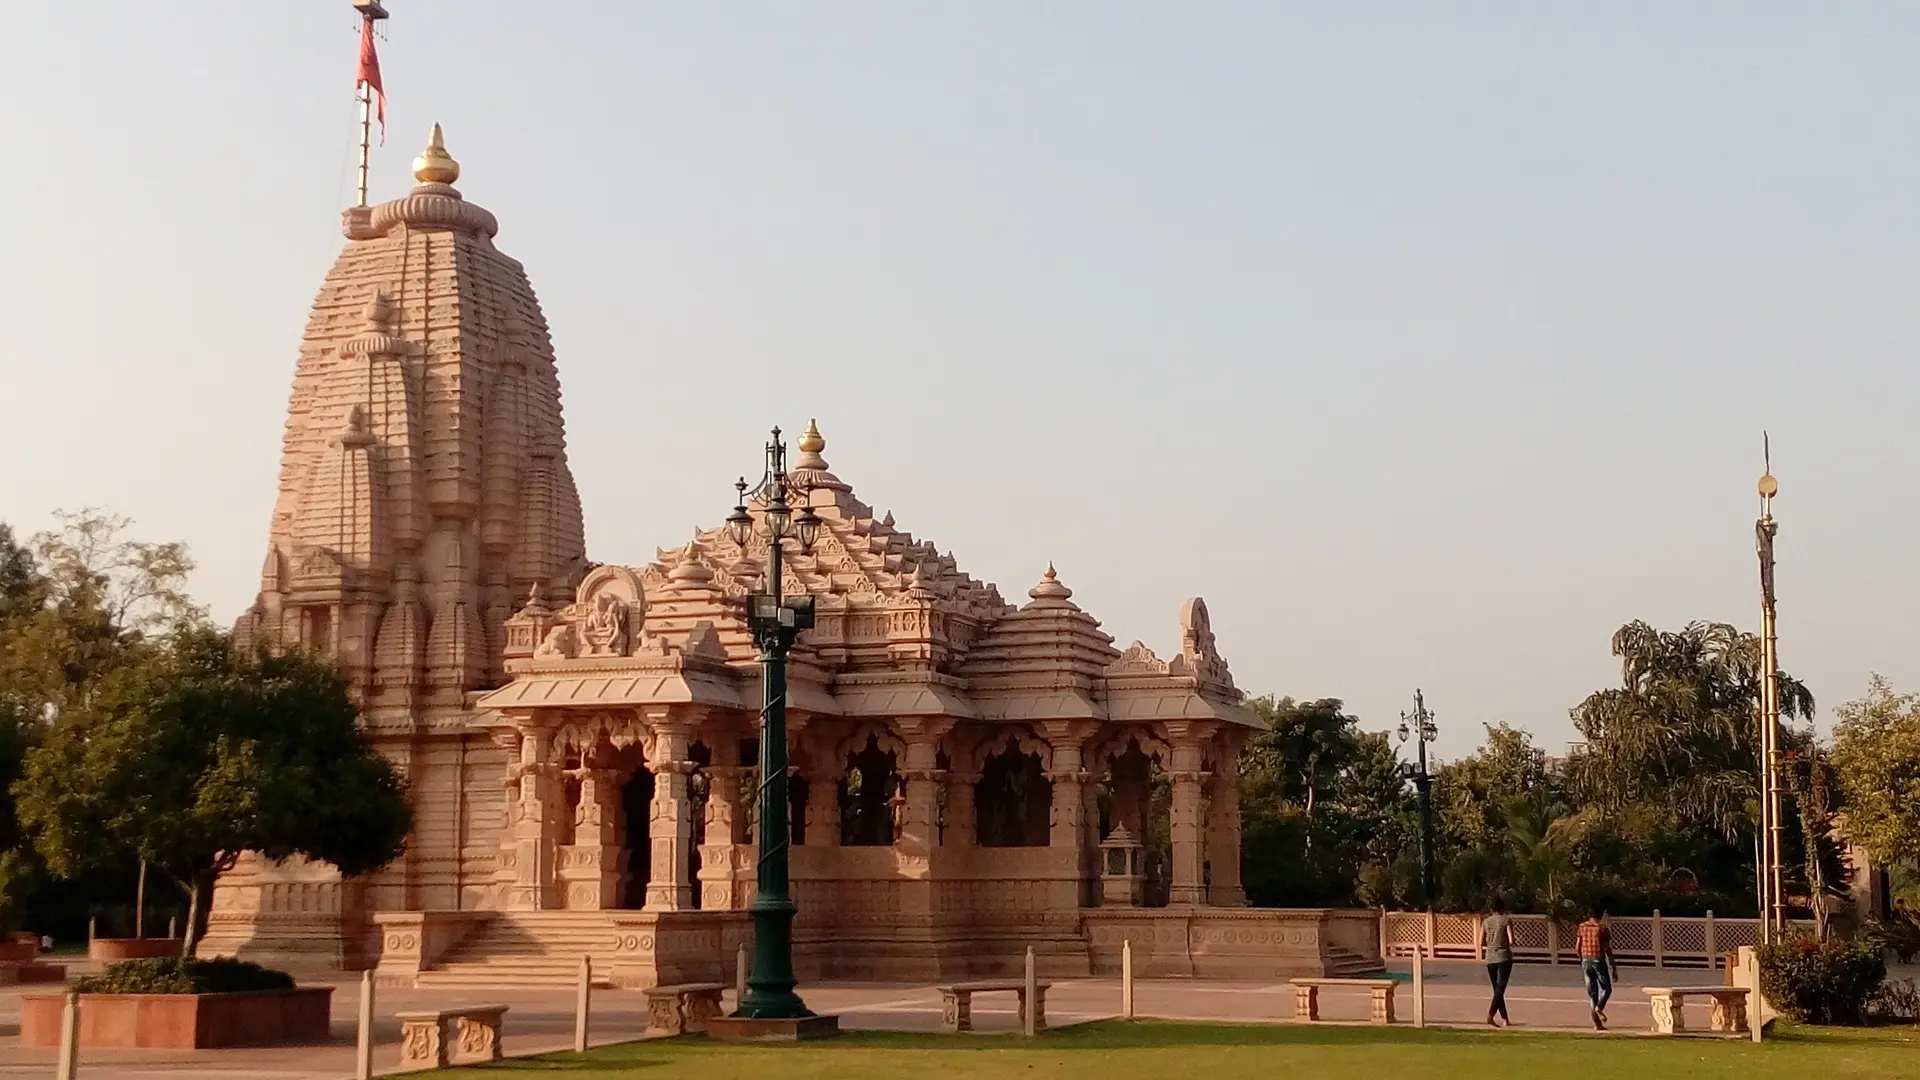 Afternoon time of the Sarvatobhadra Garbhgriha a large sand coloured building surrounded by trees.